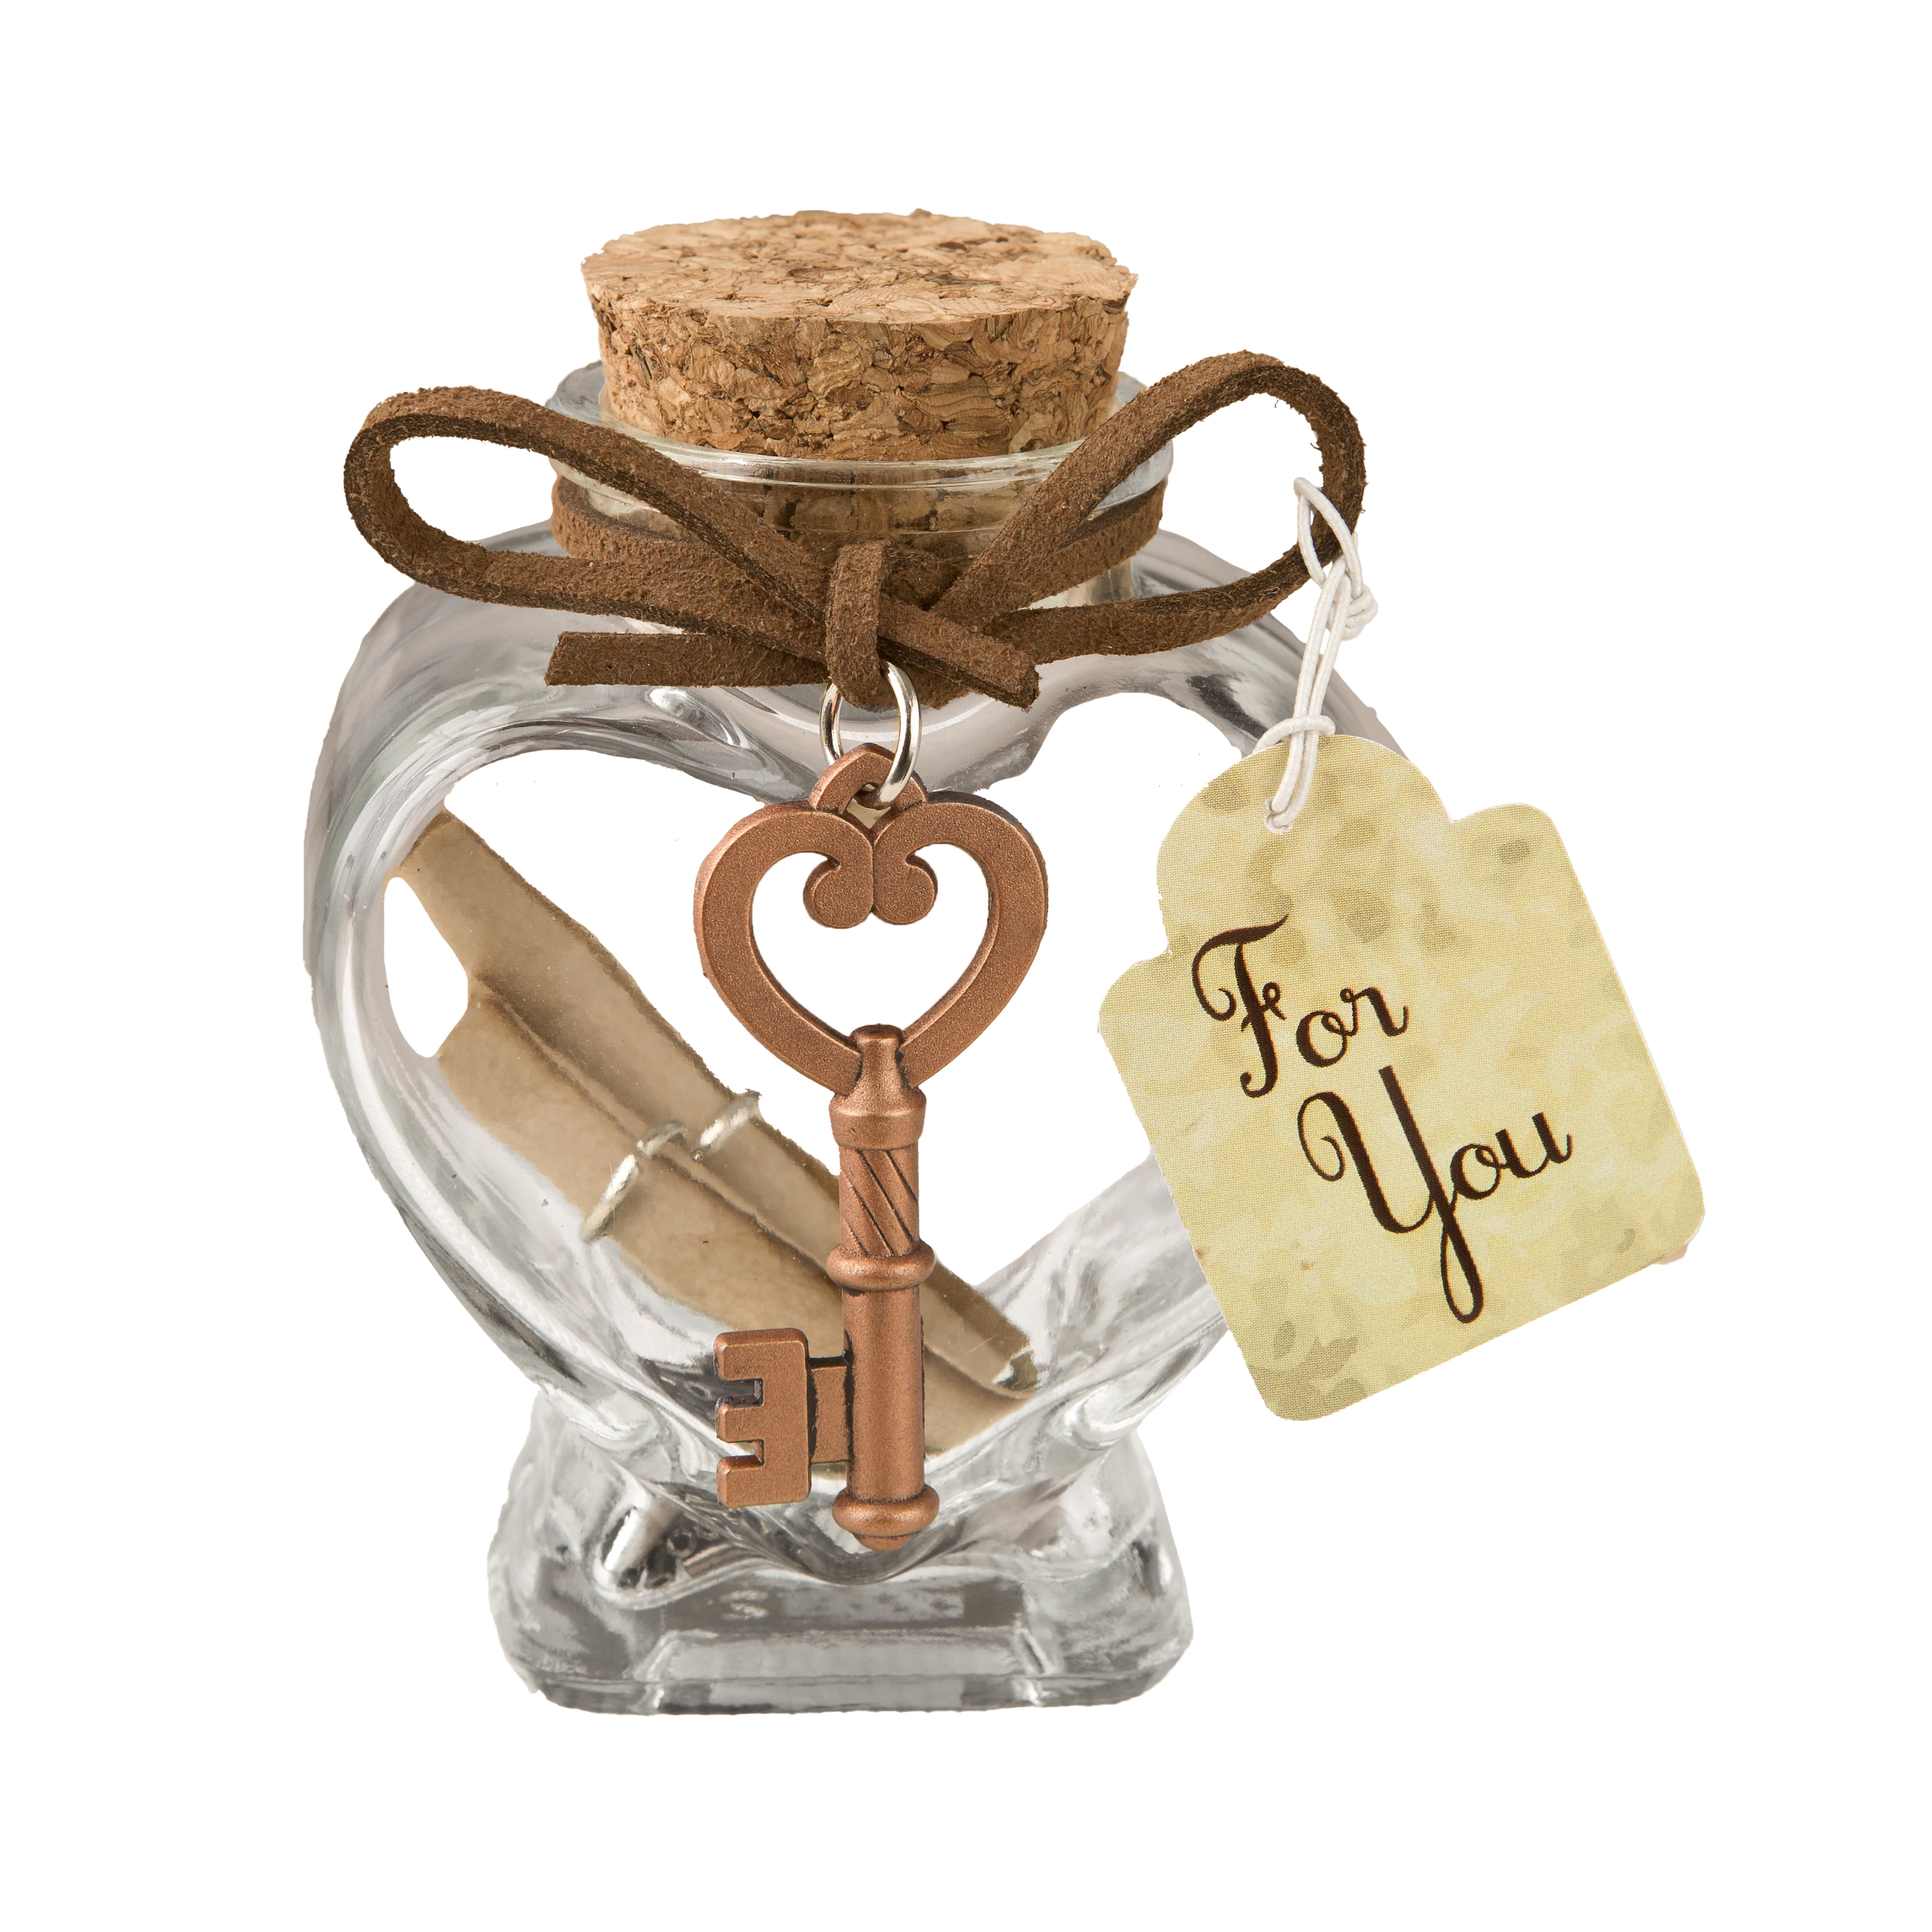 60 Heart Love Message Jars & Copper Key Wedding Bridal Baby Shower Party Favors 